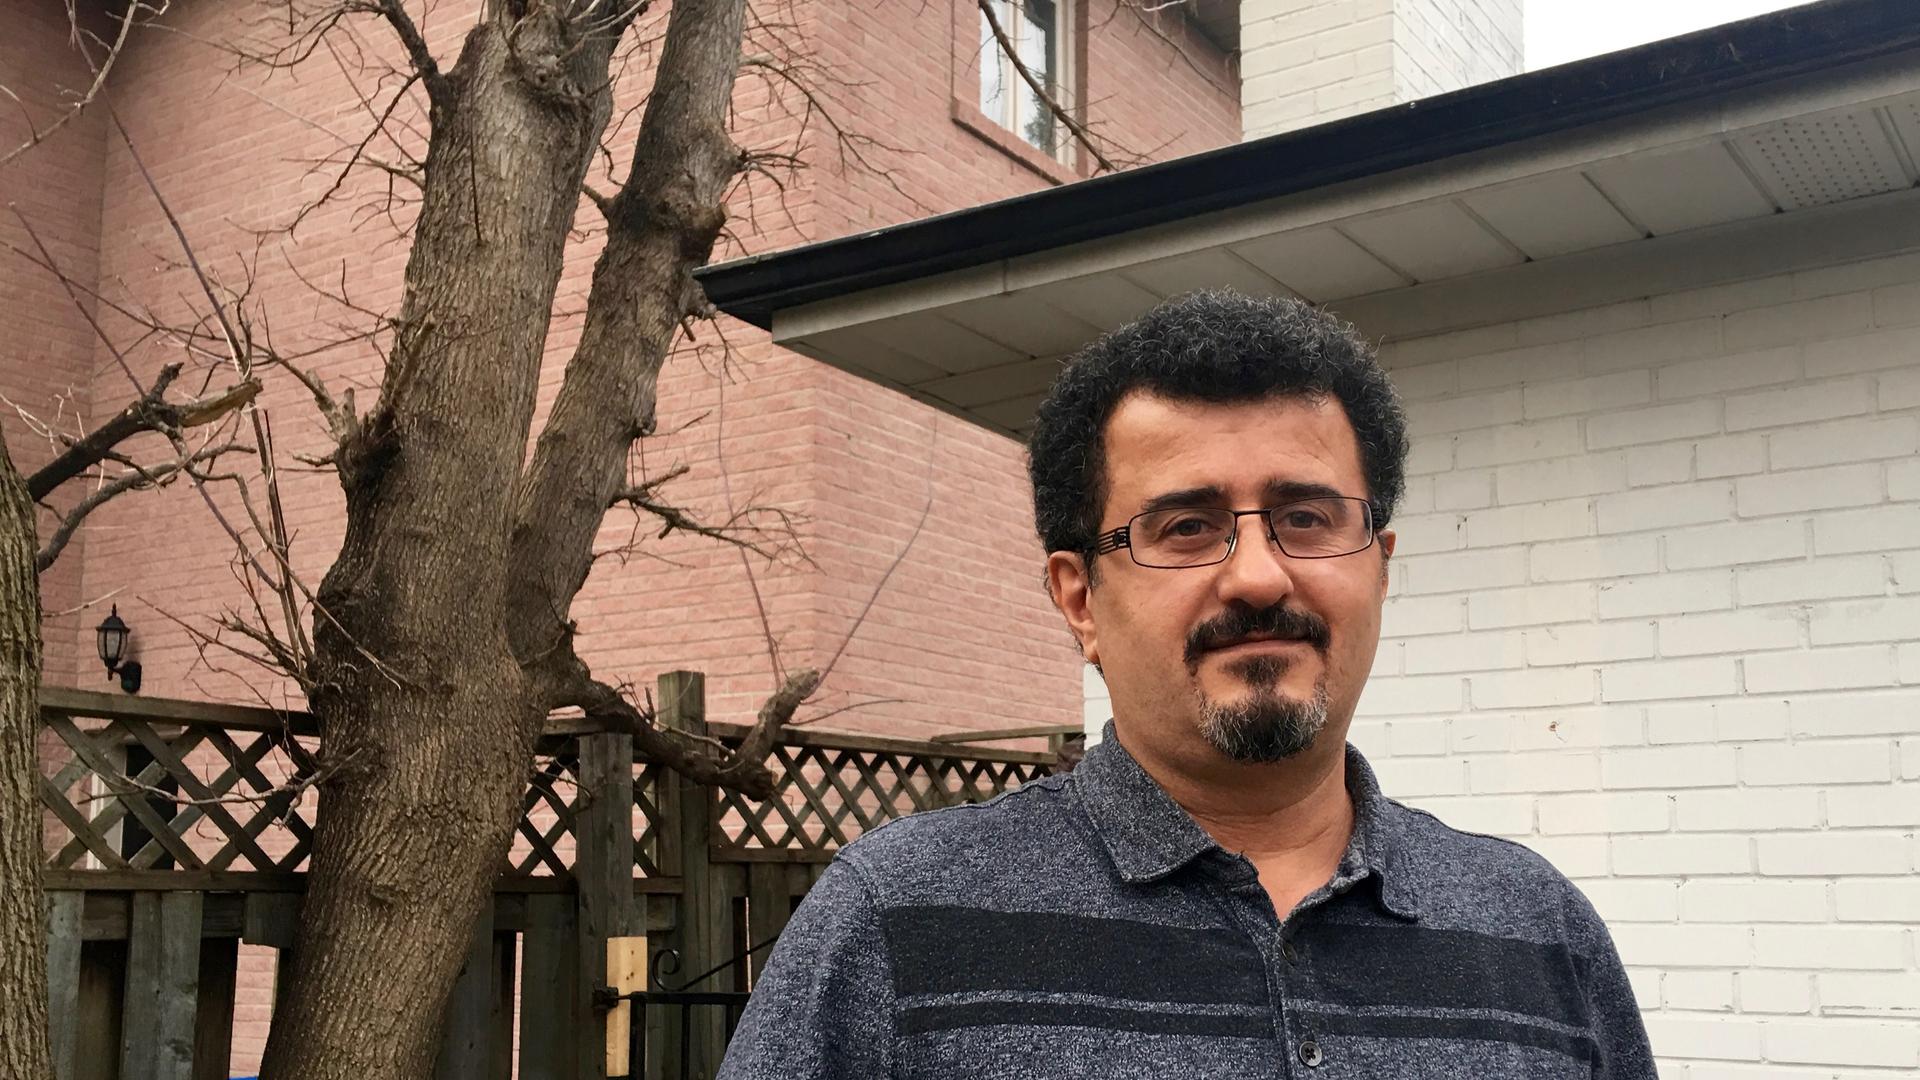 Shahram Rafizadeh was arrested, jailed and tortured after exposing human rights abuses in Iran during the late 1990s. 